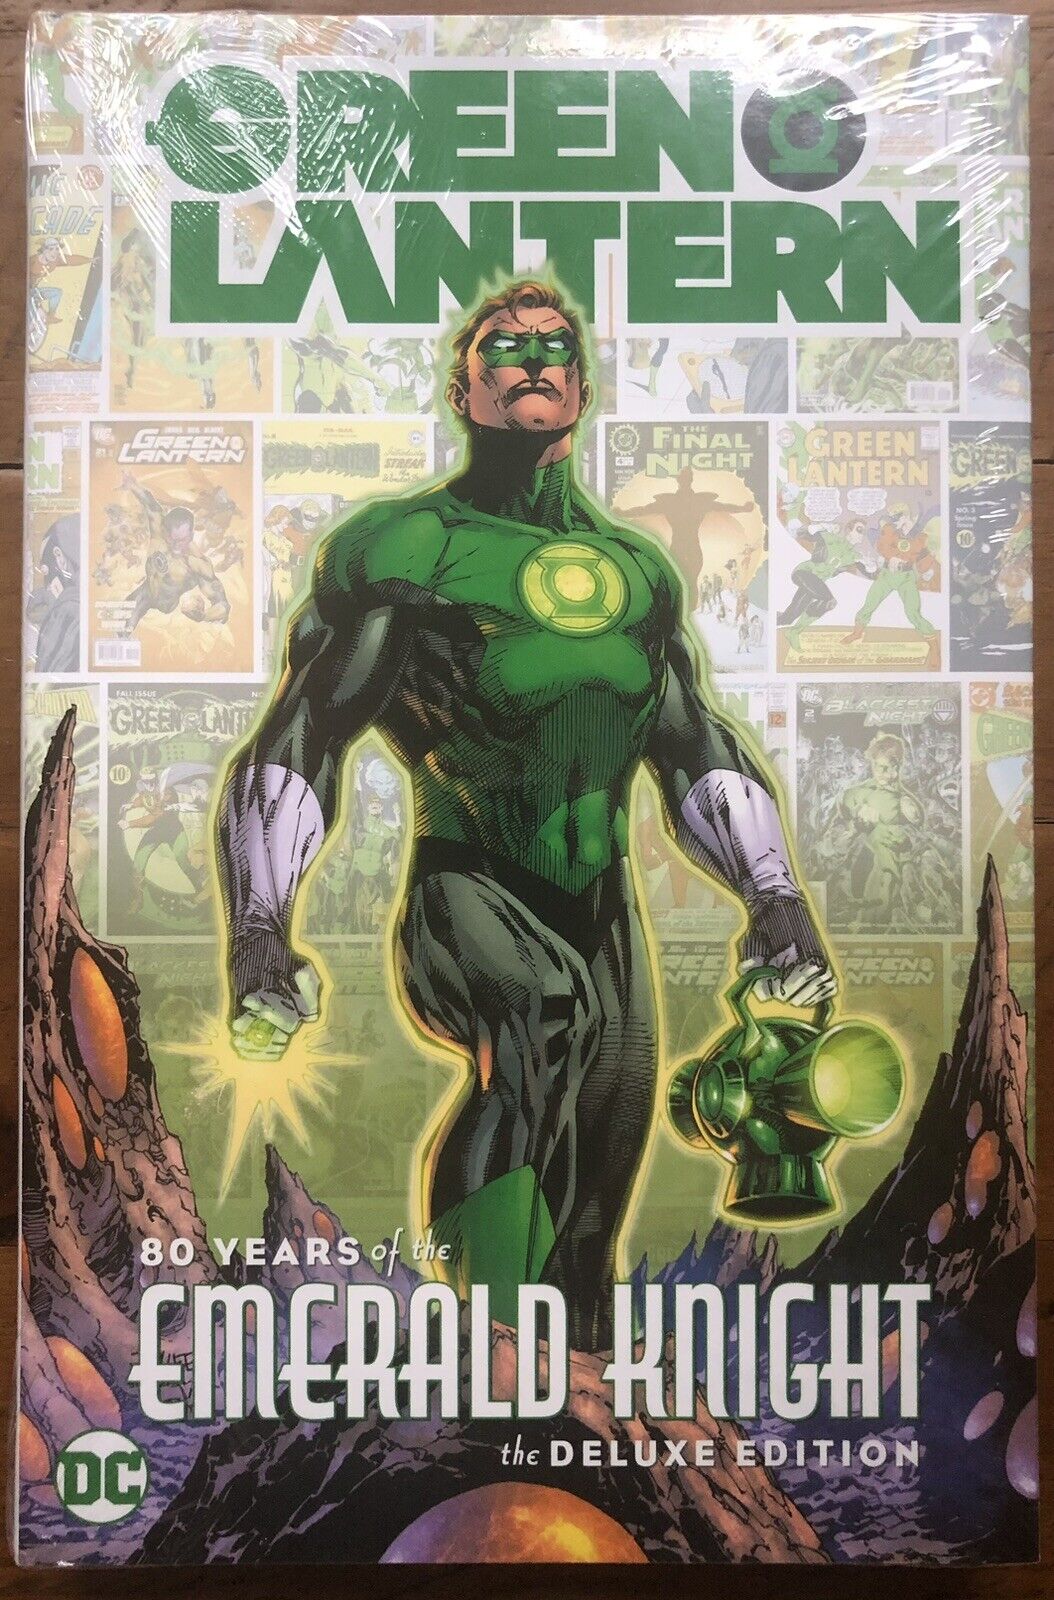 Green Lantern: 80 Years of the Emerald Knight Deluxe Edition DC Comics — SEALED